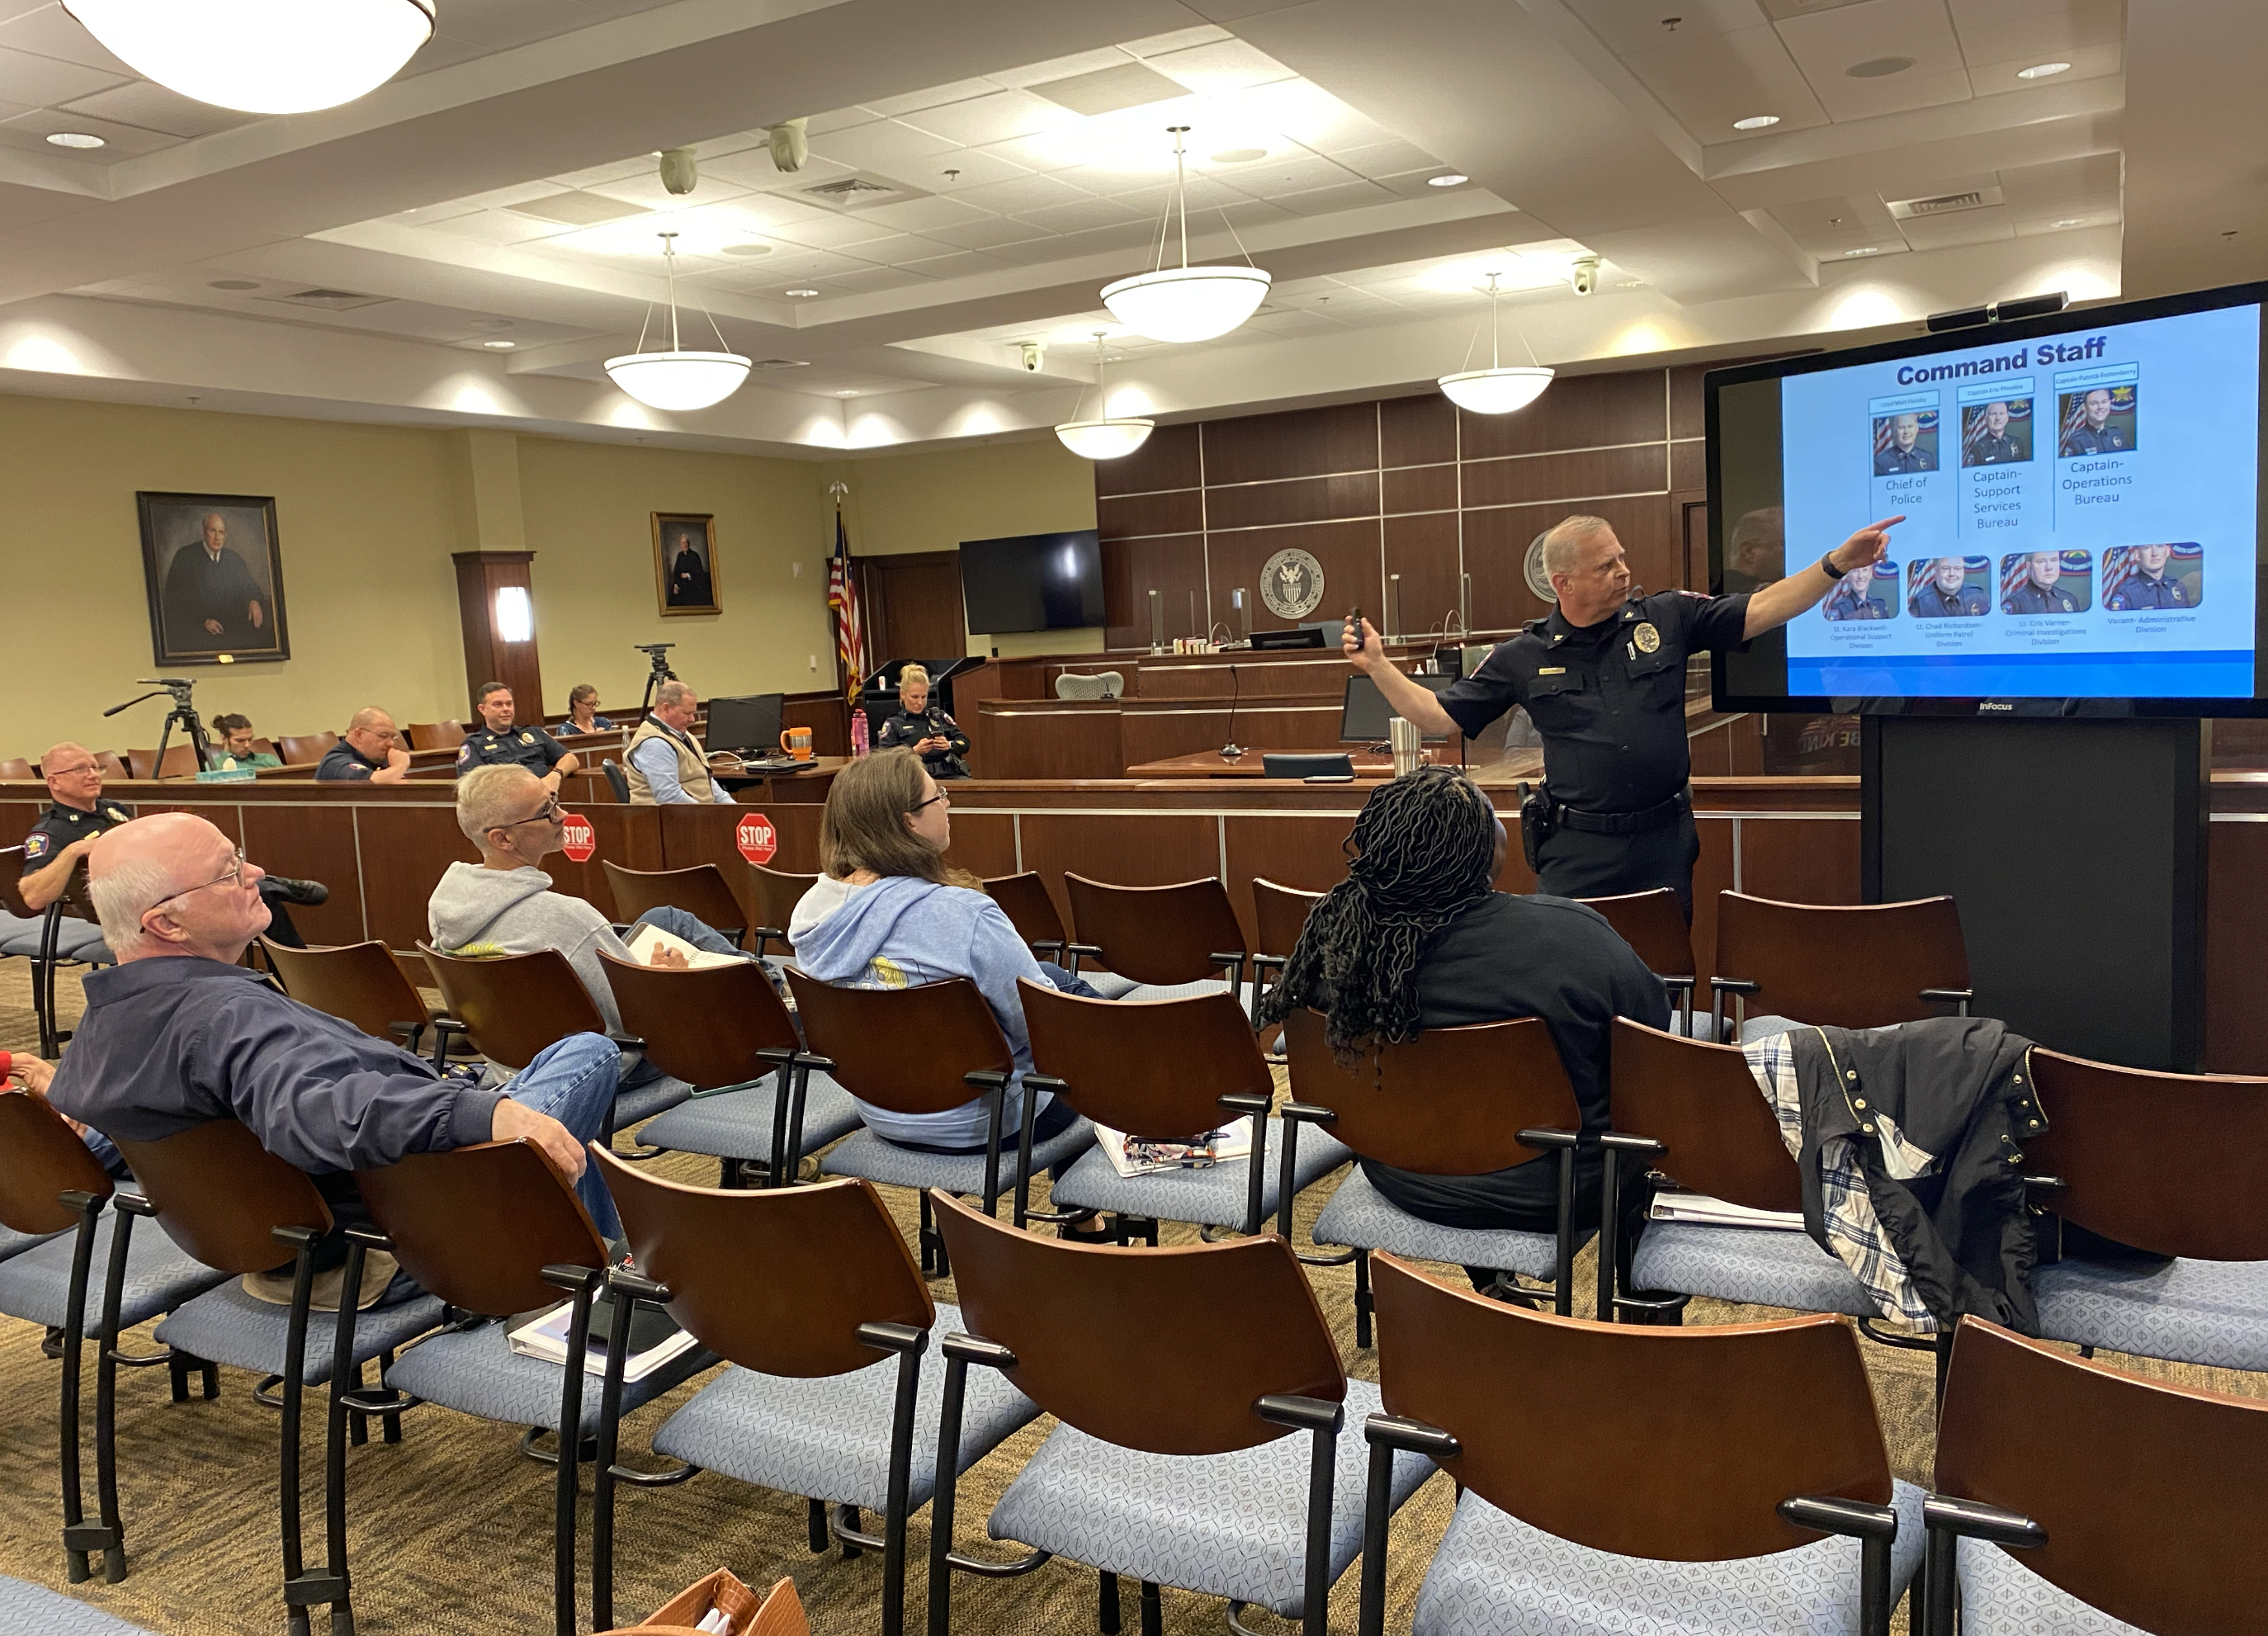 police chief teaching class in court room